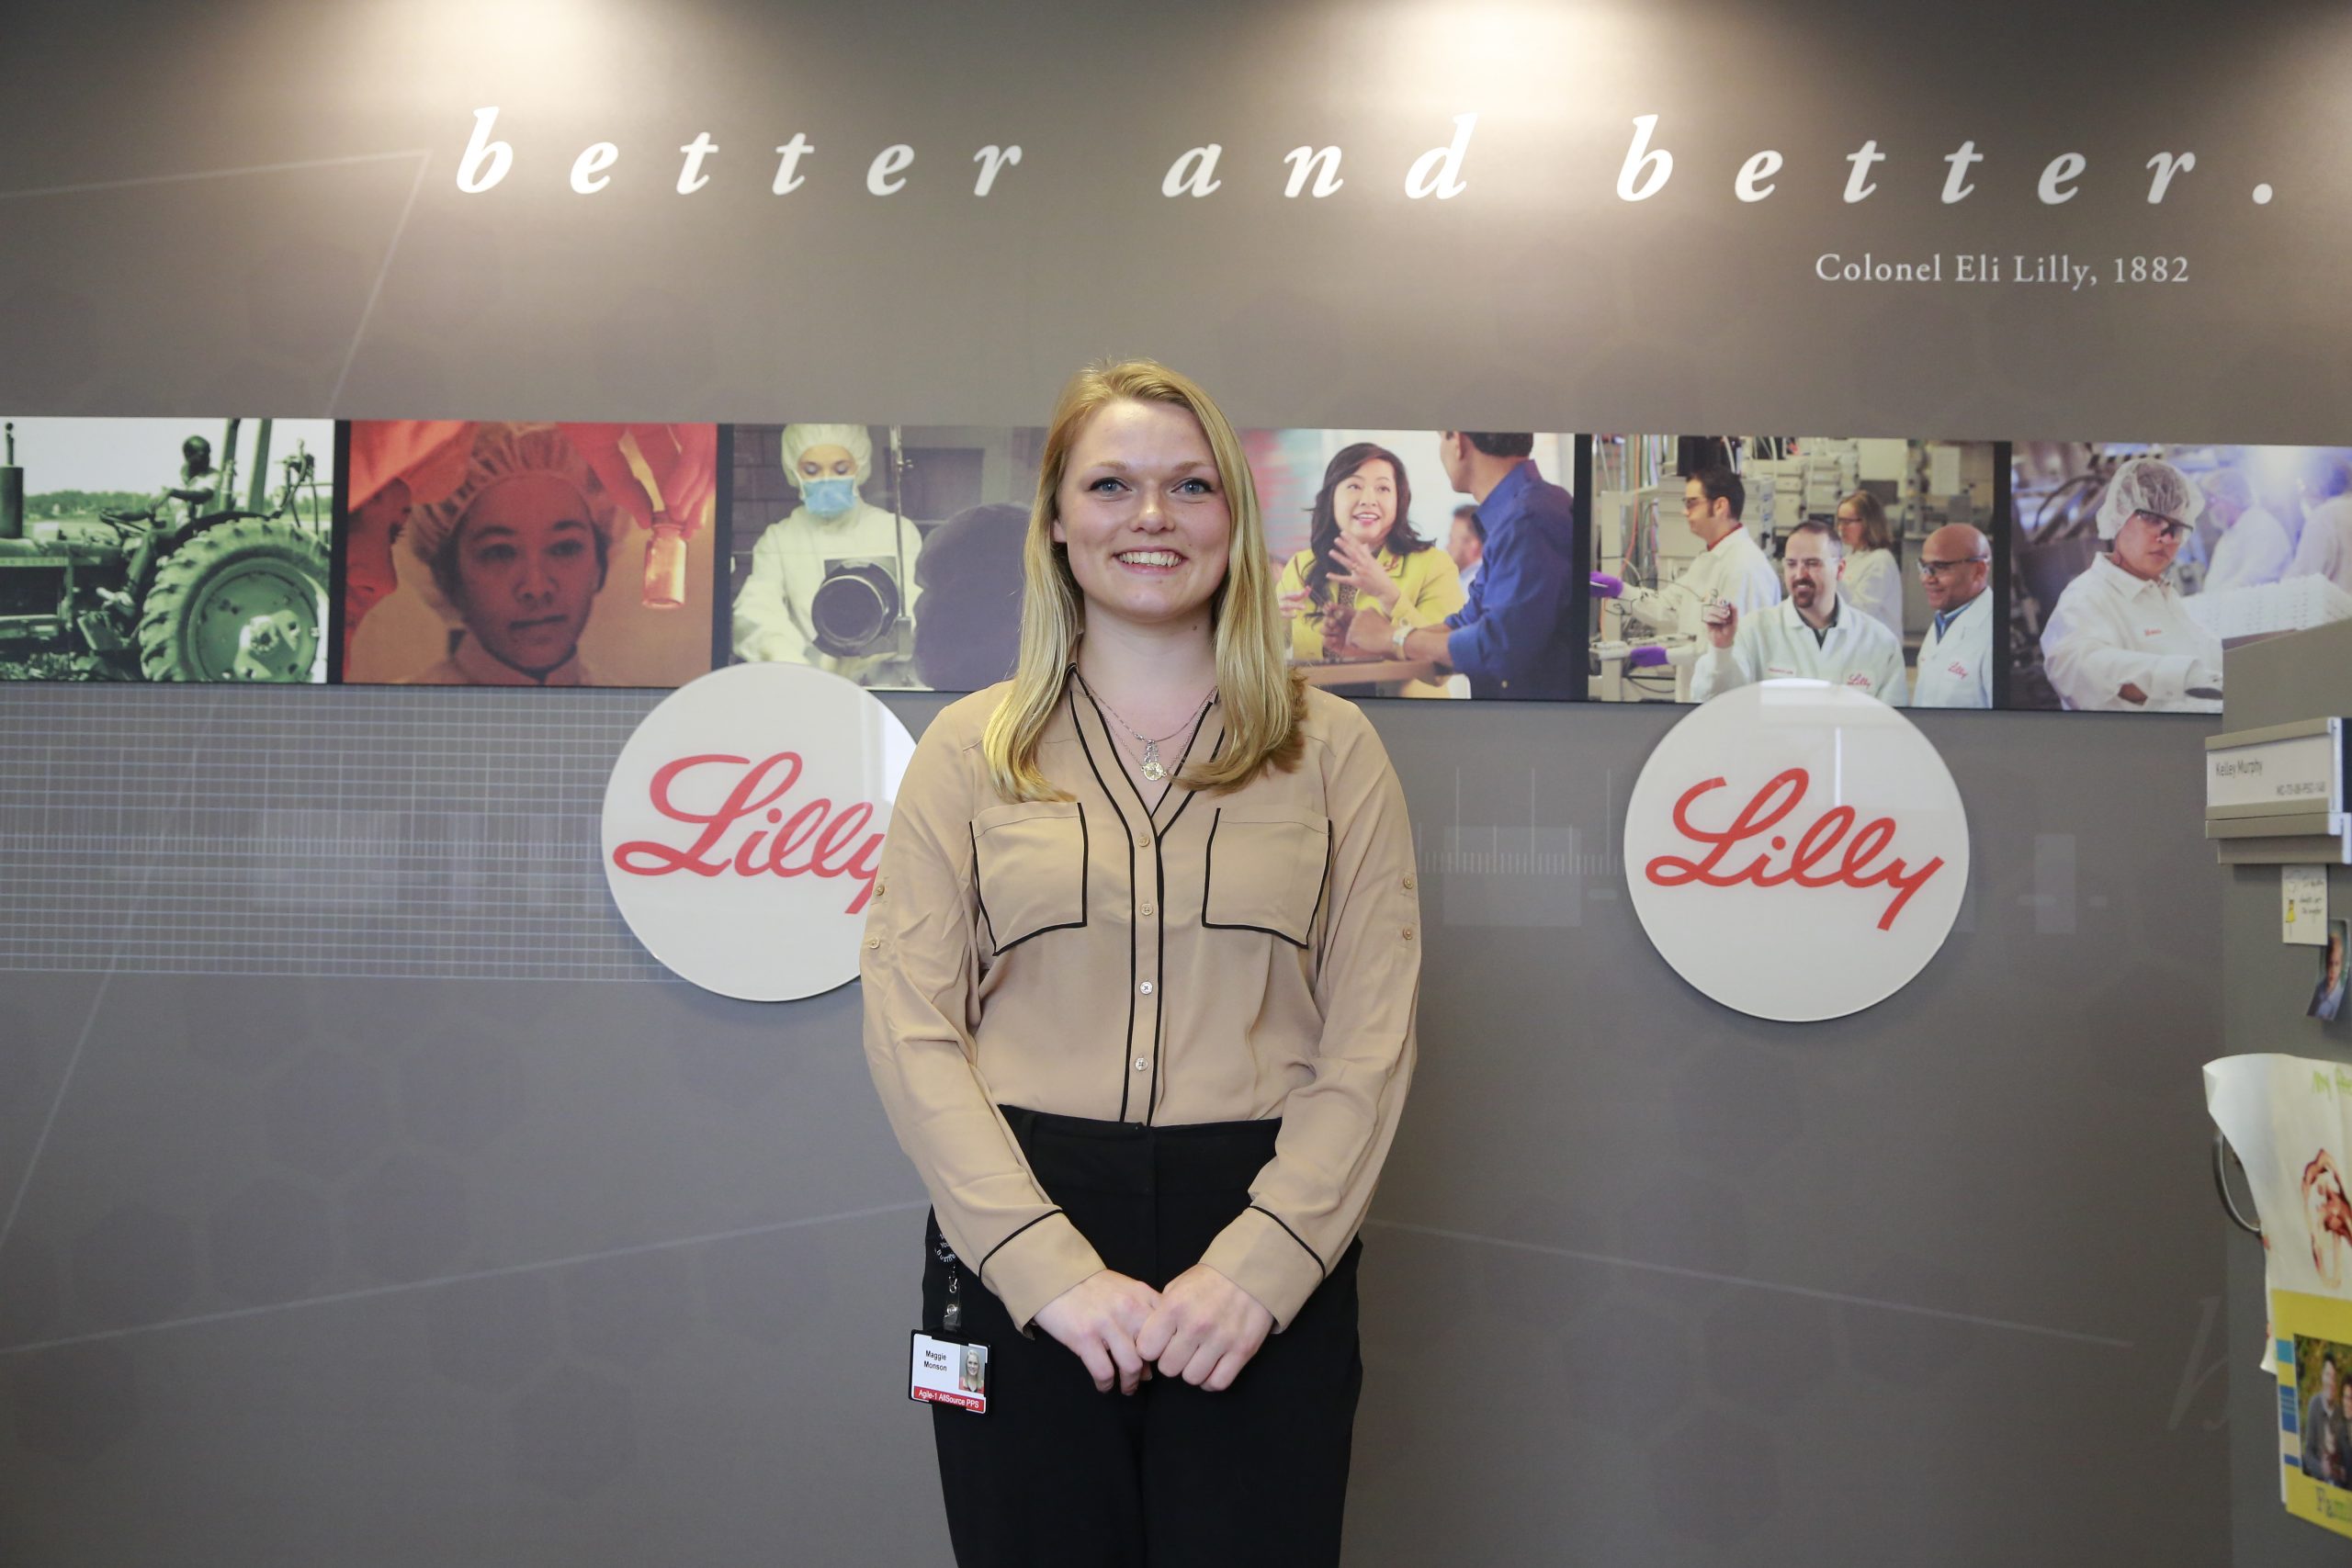 A student with an internship at Eli Lilly